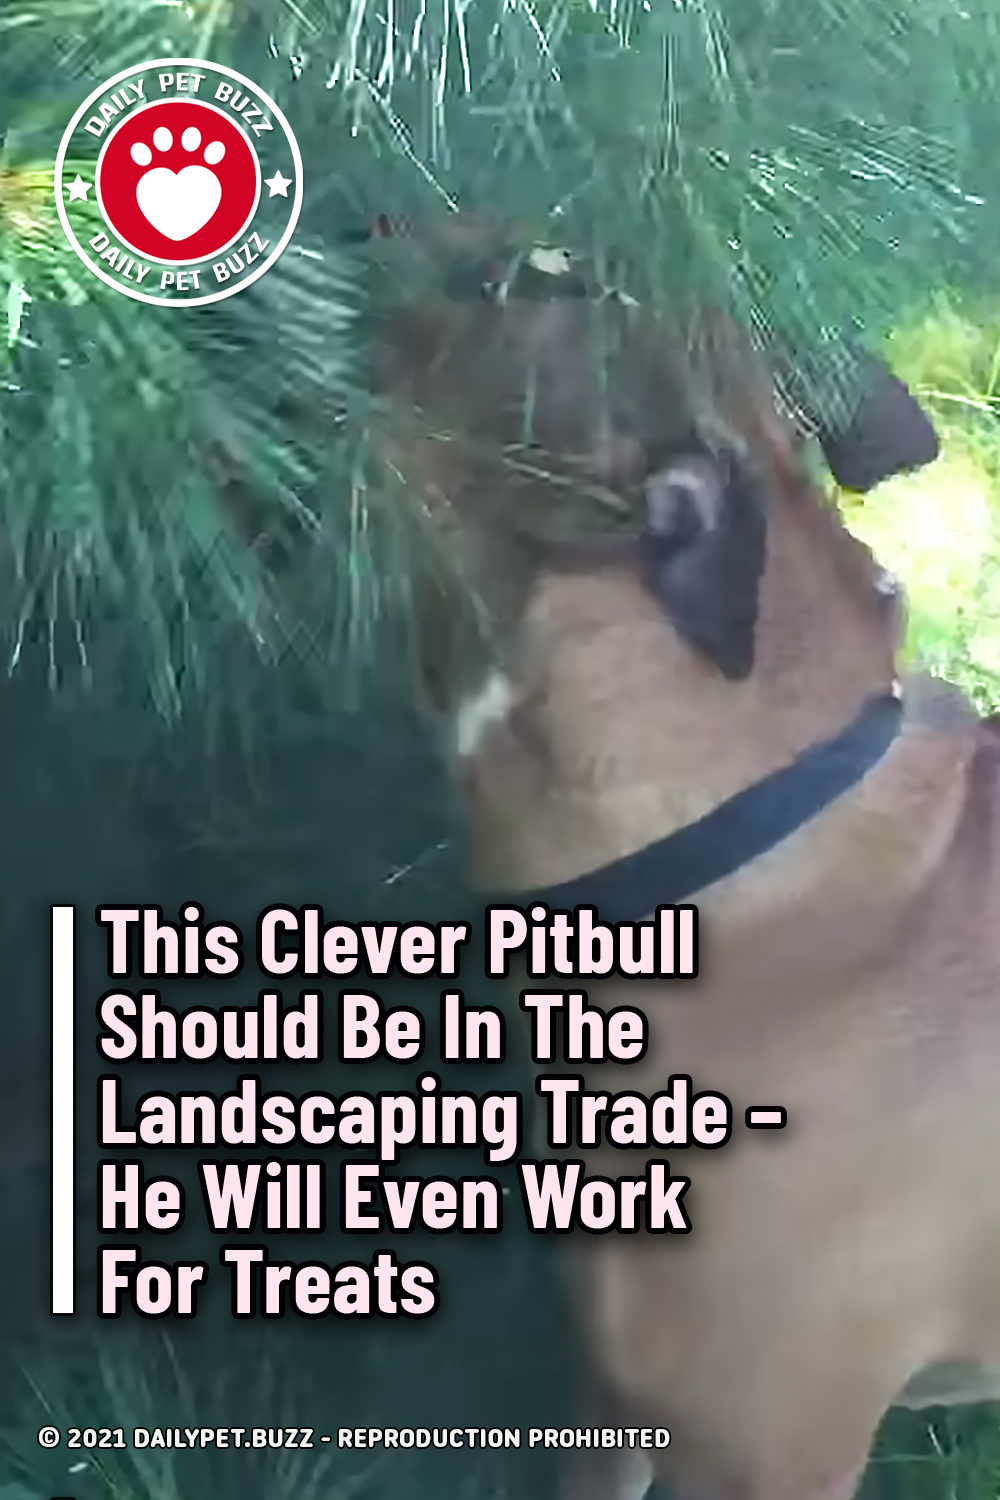 This Clever Pitbull Should Be In The Landscaping Trade – He Will Even Work For Treats